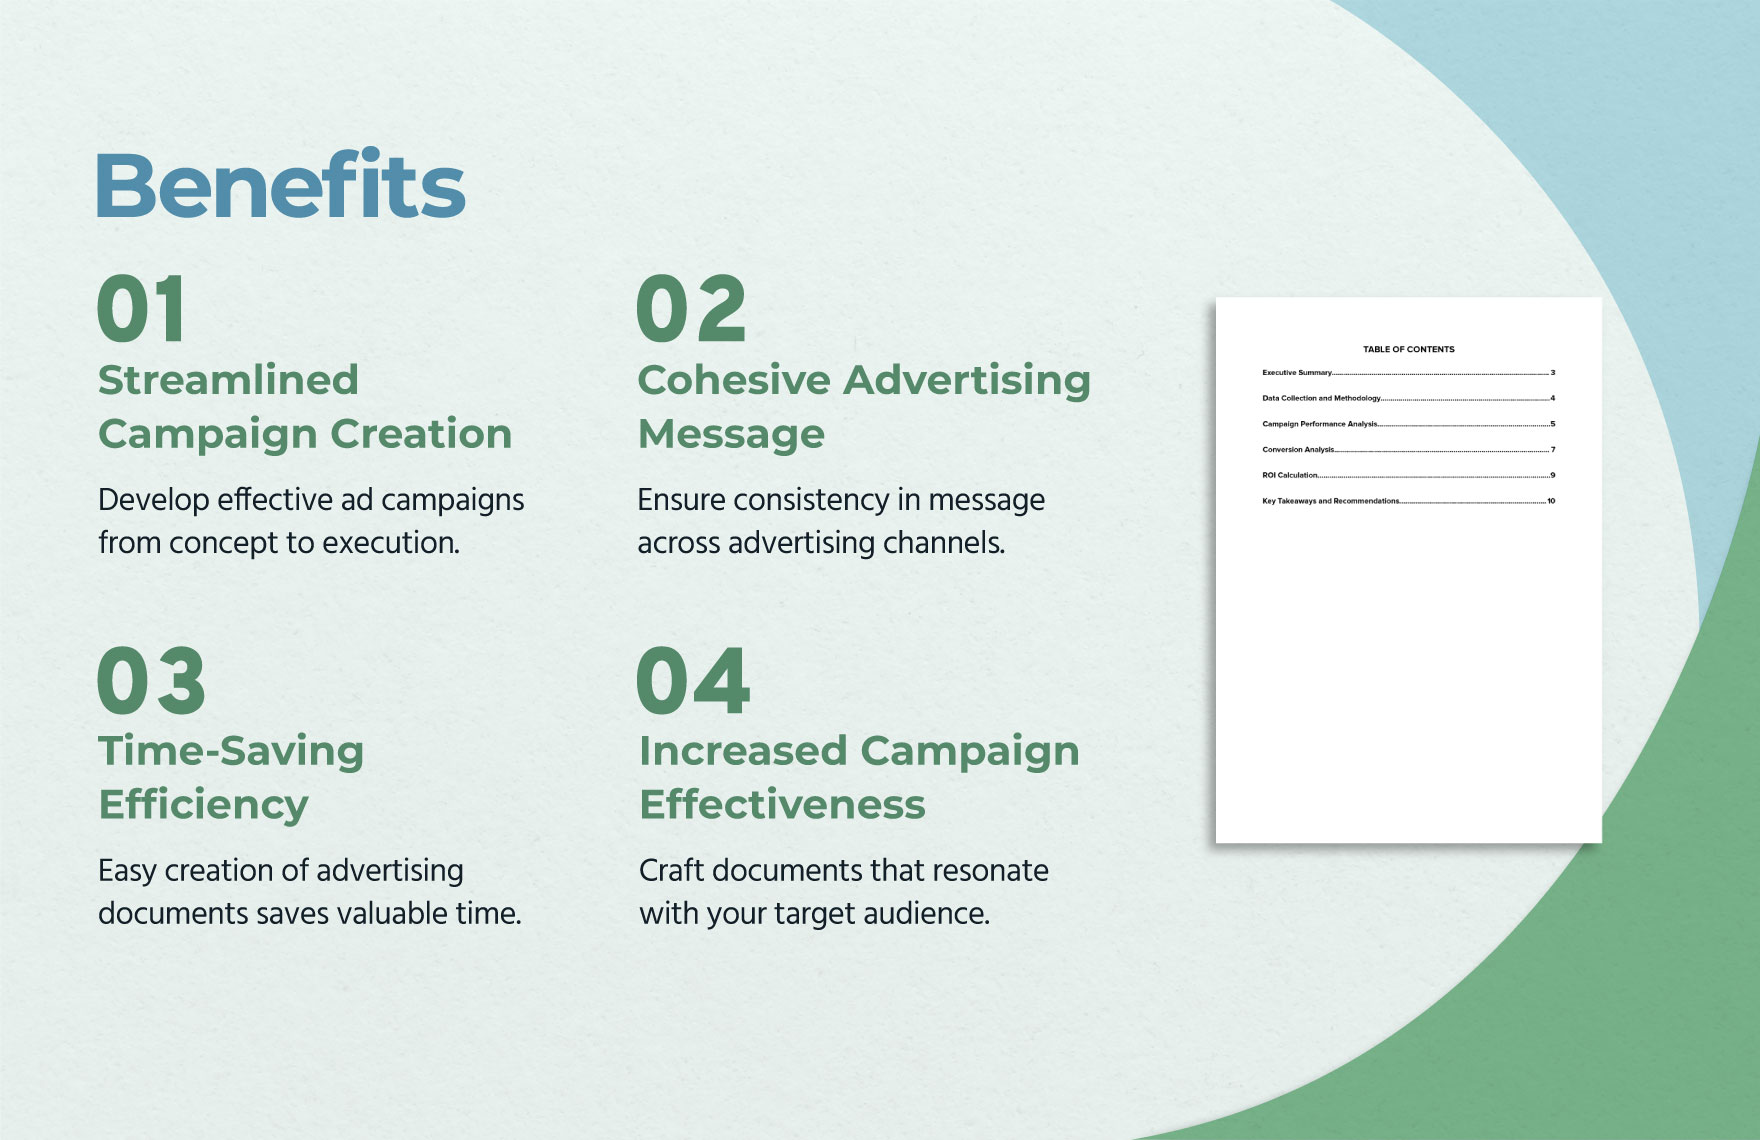 Multi-Campaign Influencer Advertising Analysis Template